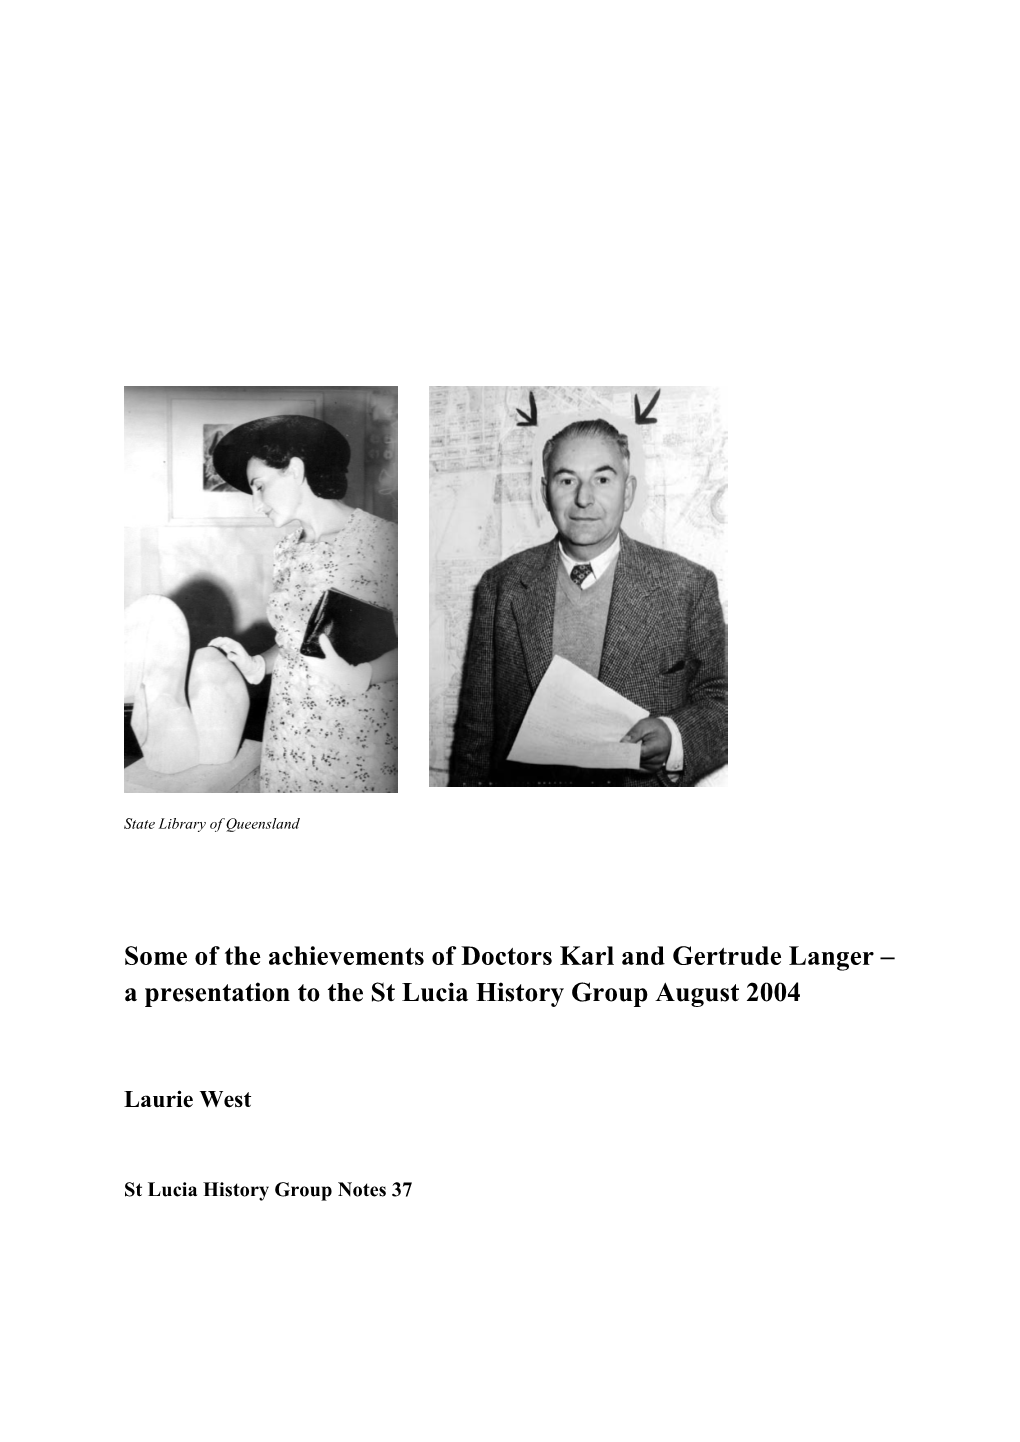 Karl and Gertrude Langer – a Presentation to the St Lucia History Group August 2004